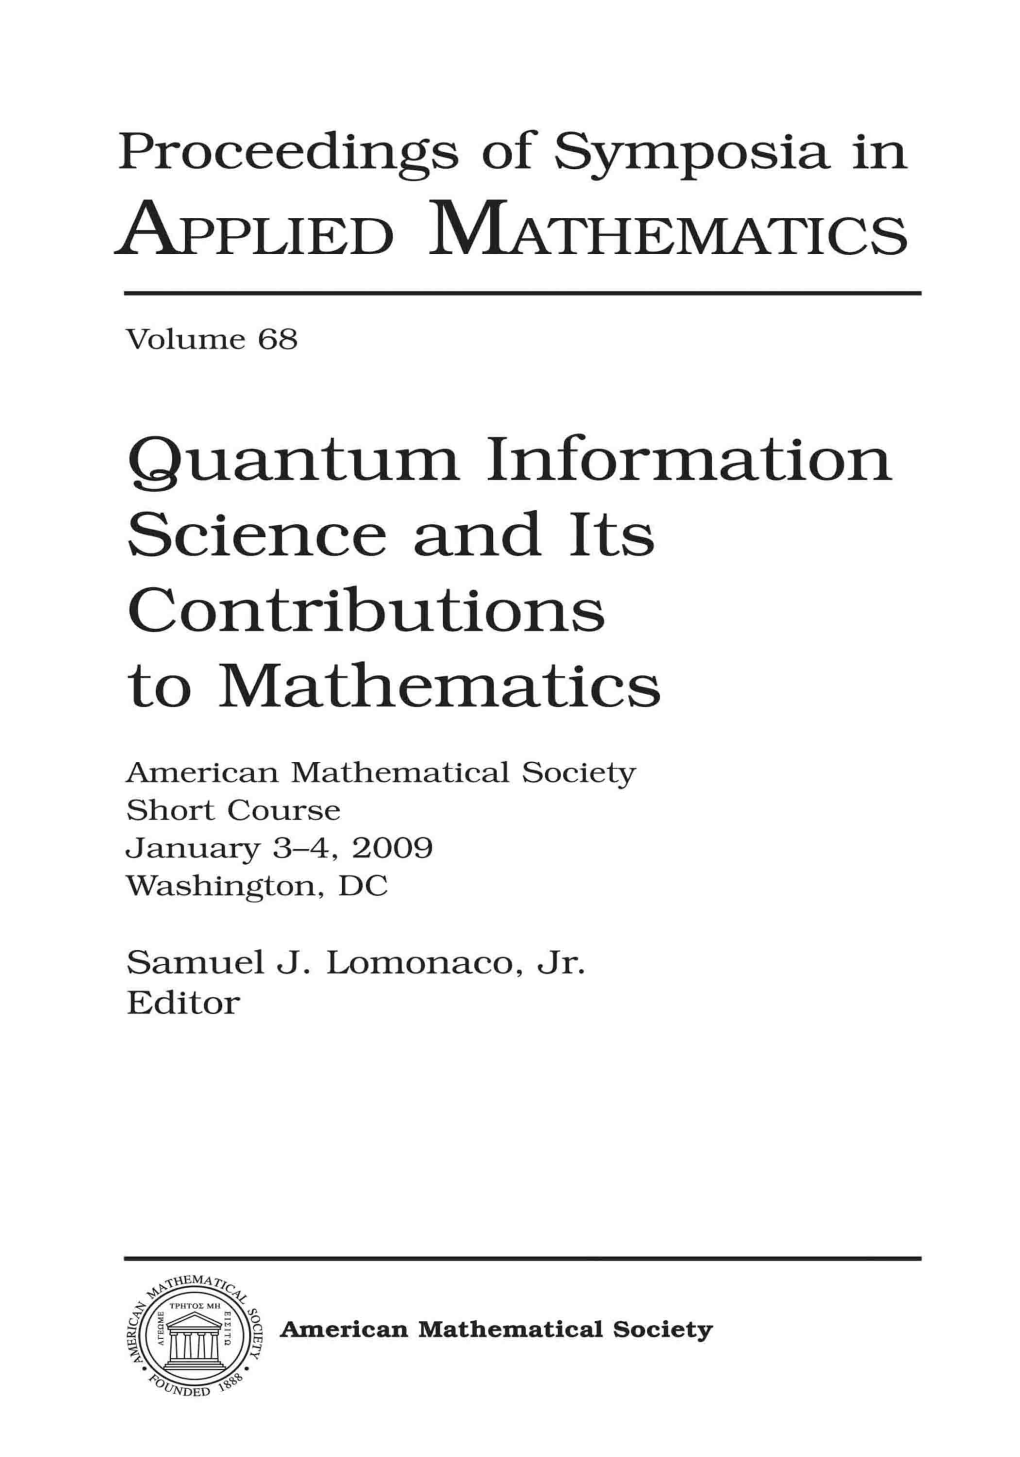 Quantum Information Science and Its Contributions to Mathematics